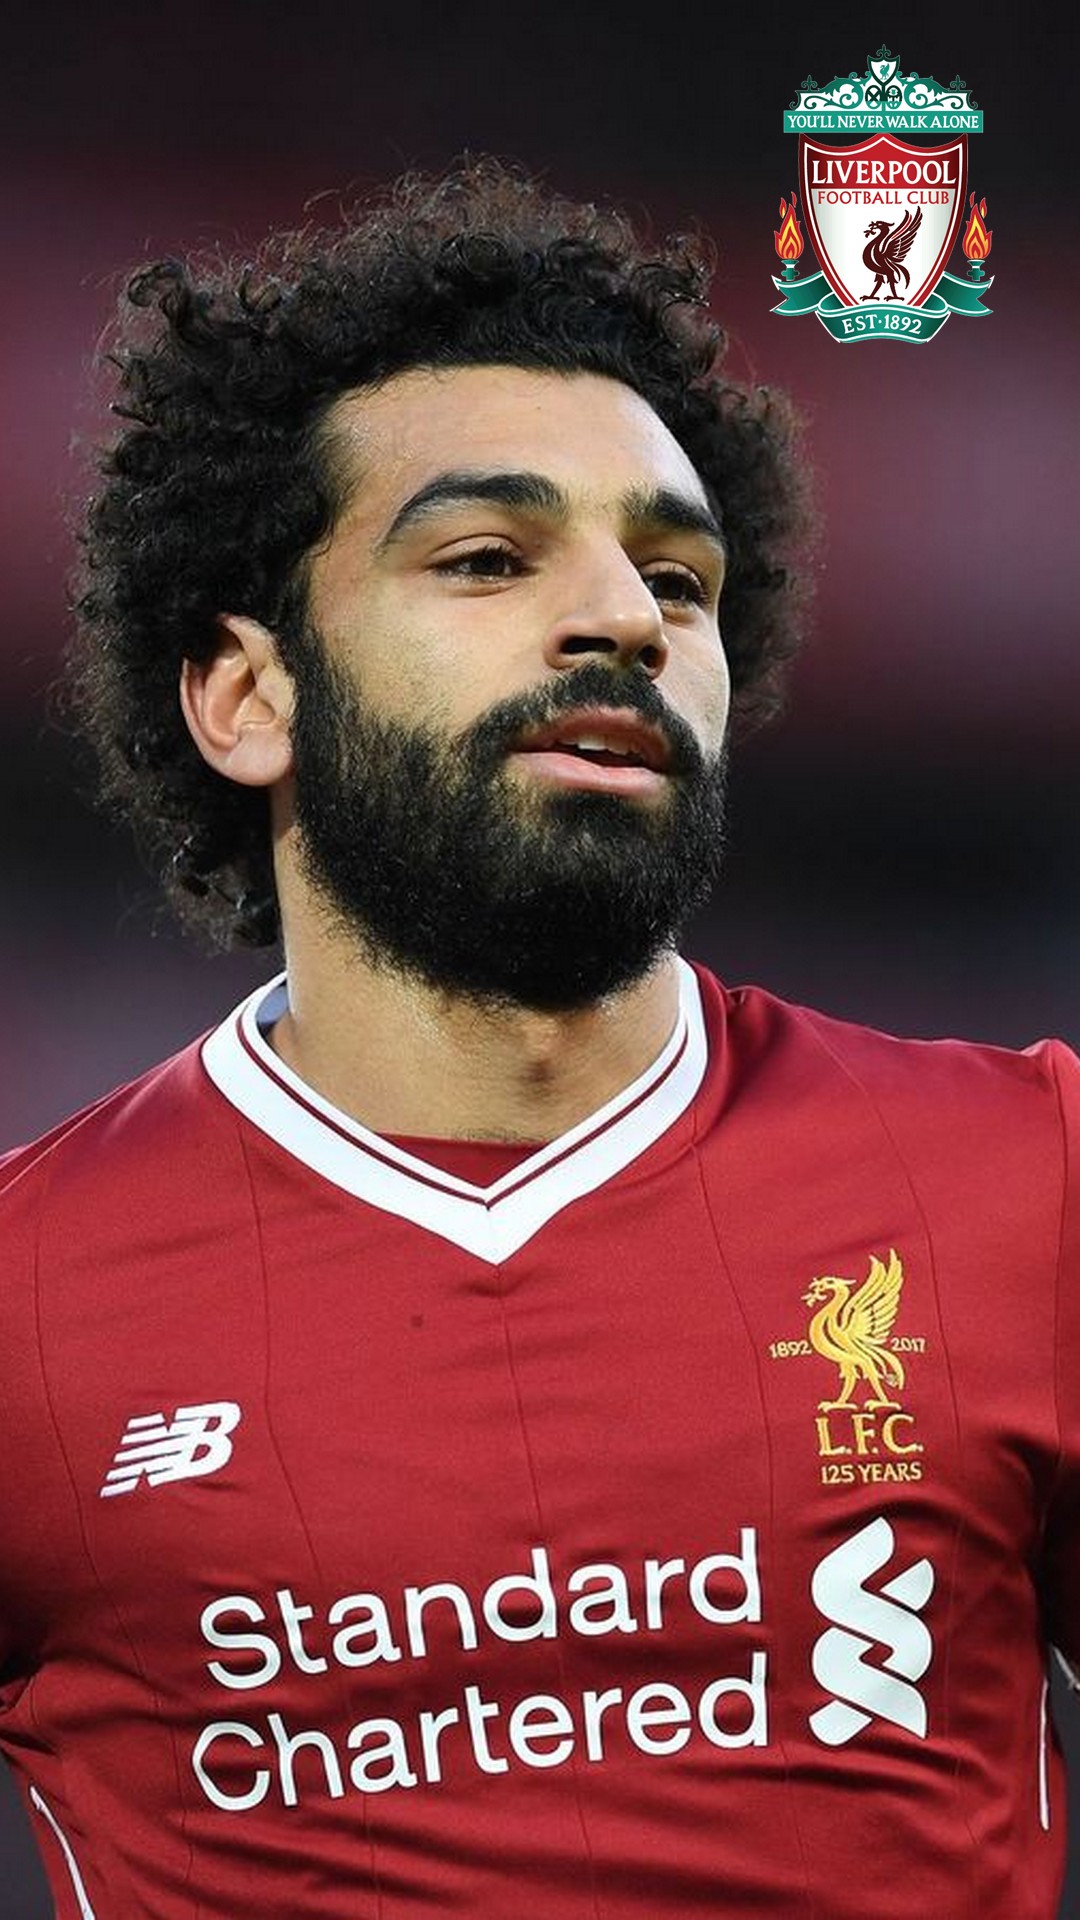 Mohamed Salah Pictures Android Wallpaper with image resolution 1080x1920 pixel. You can make this wallpaper for your Android backgrounds, Tablet, Smartphones Screensavers and Mobile Phone Lock Screen